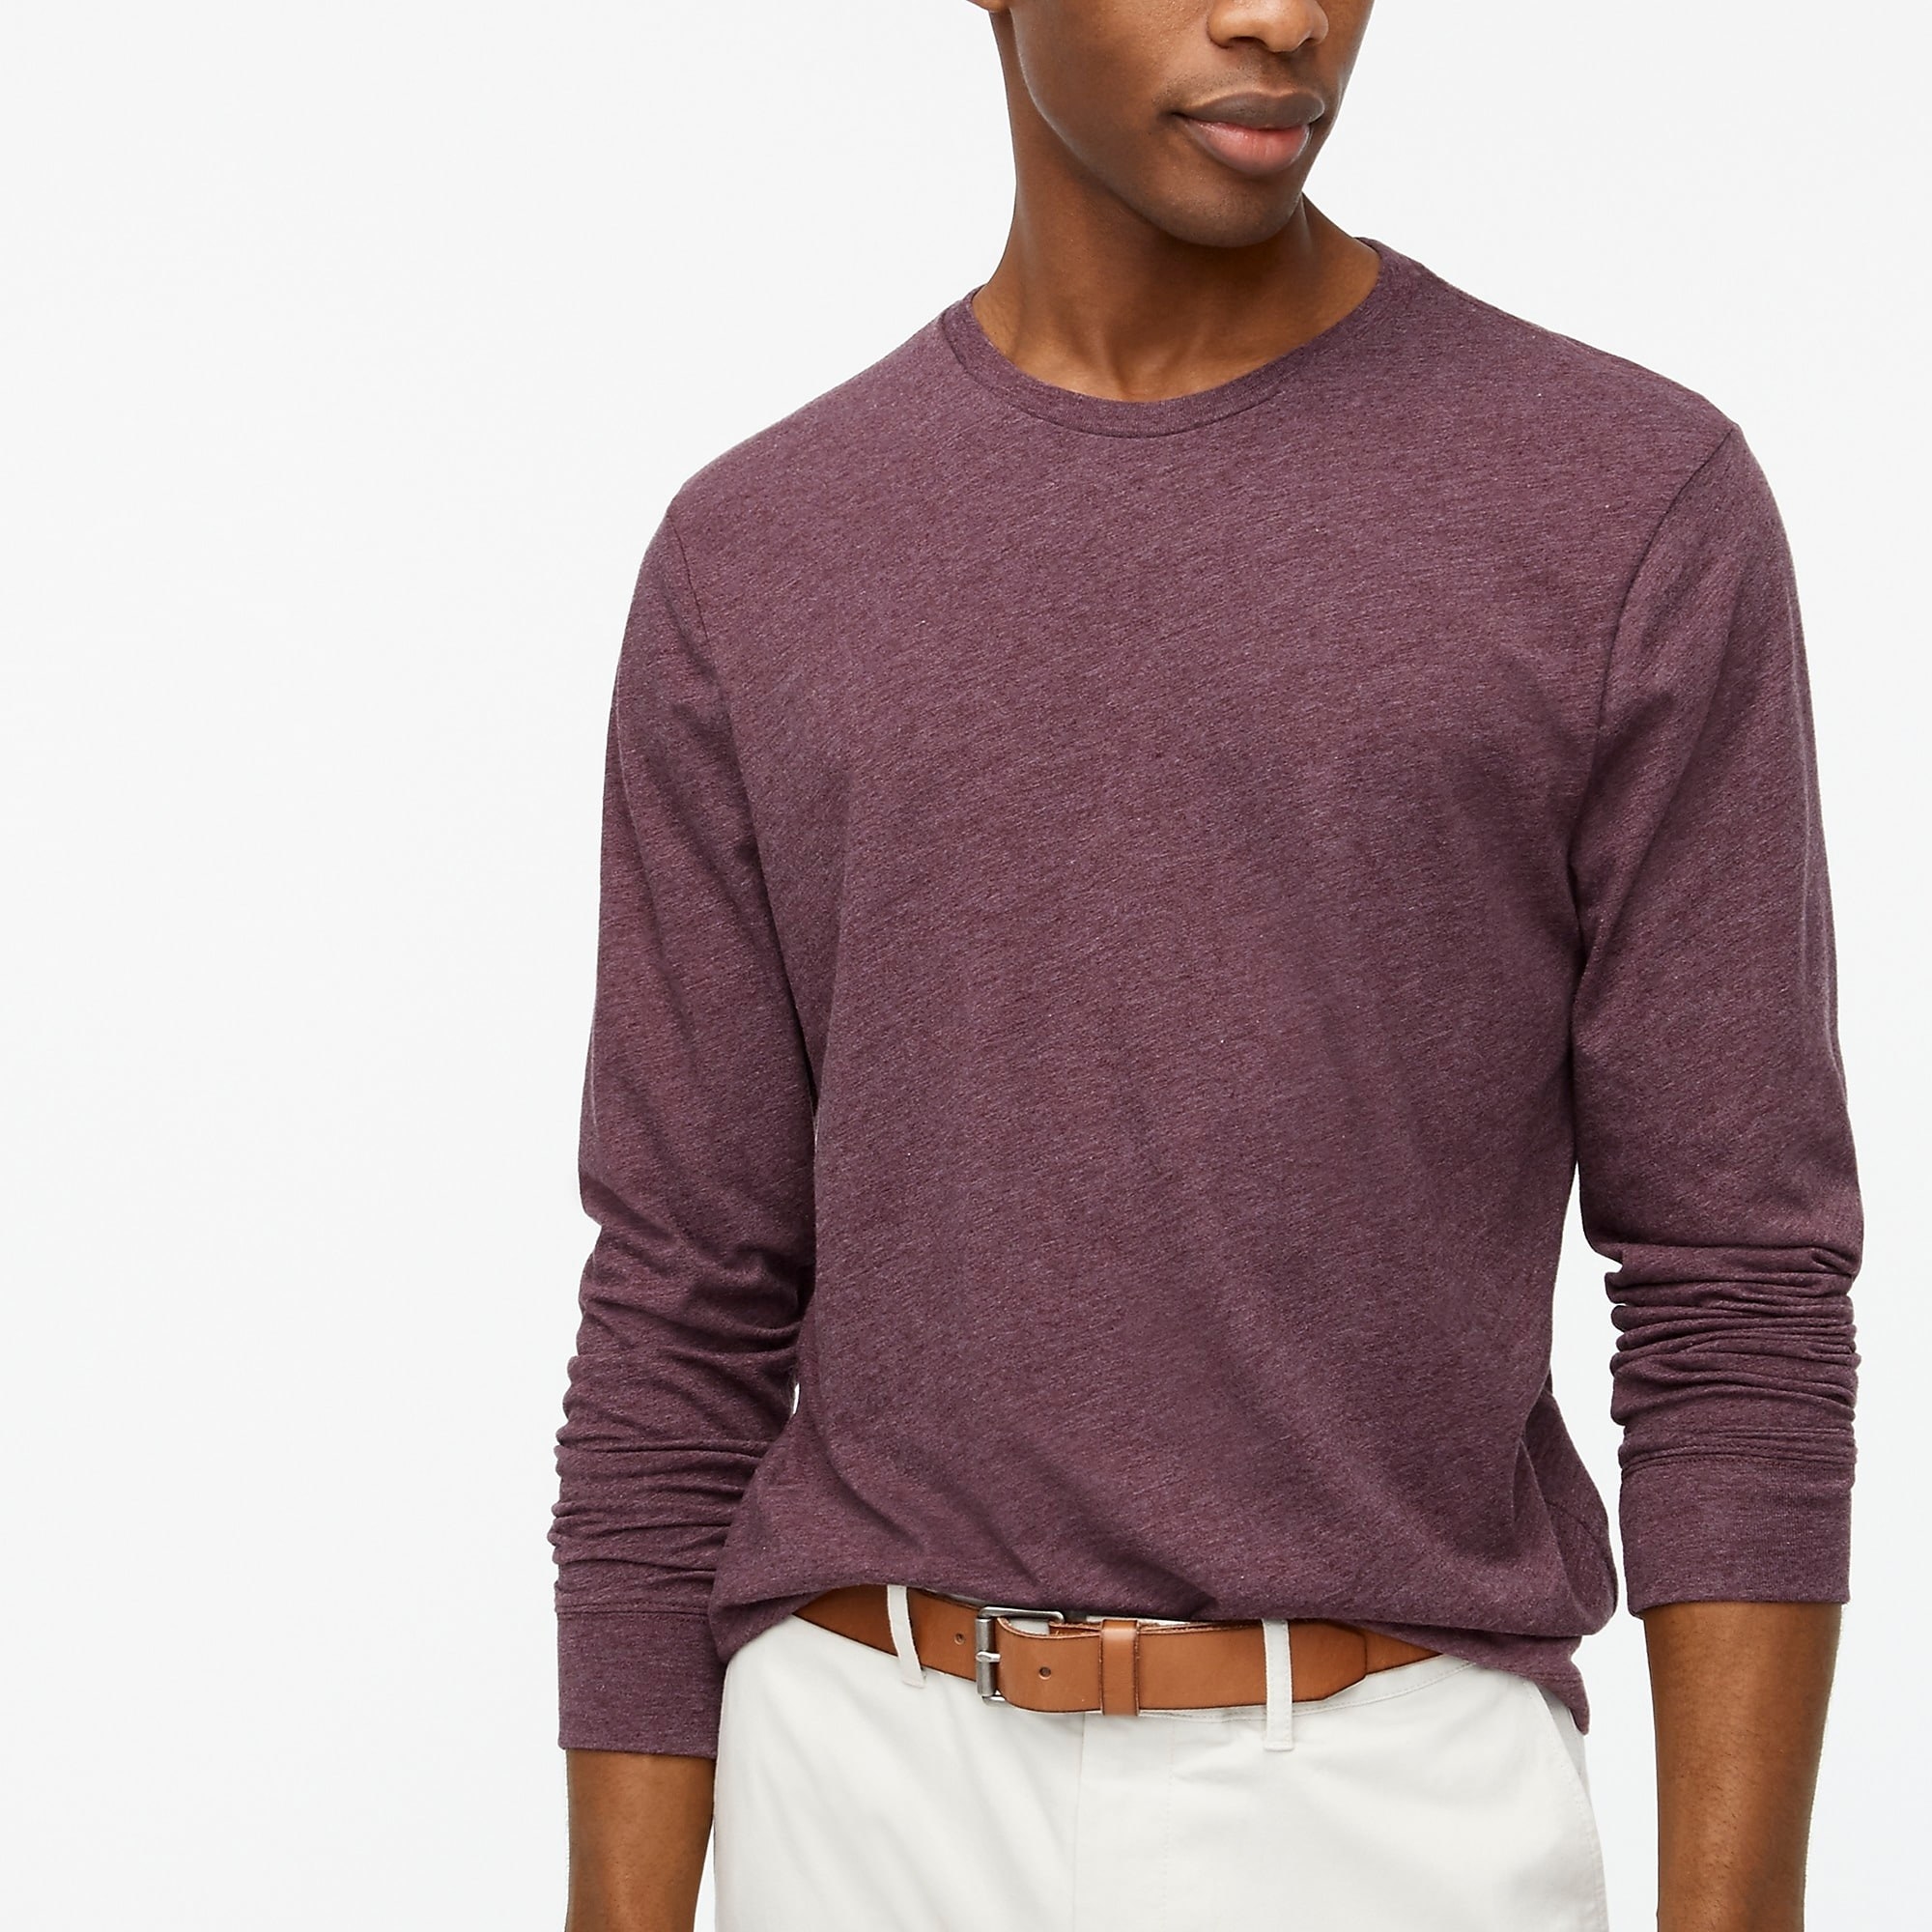 model wearing the tee in purple with white pants and a brown belt